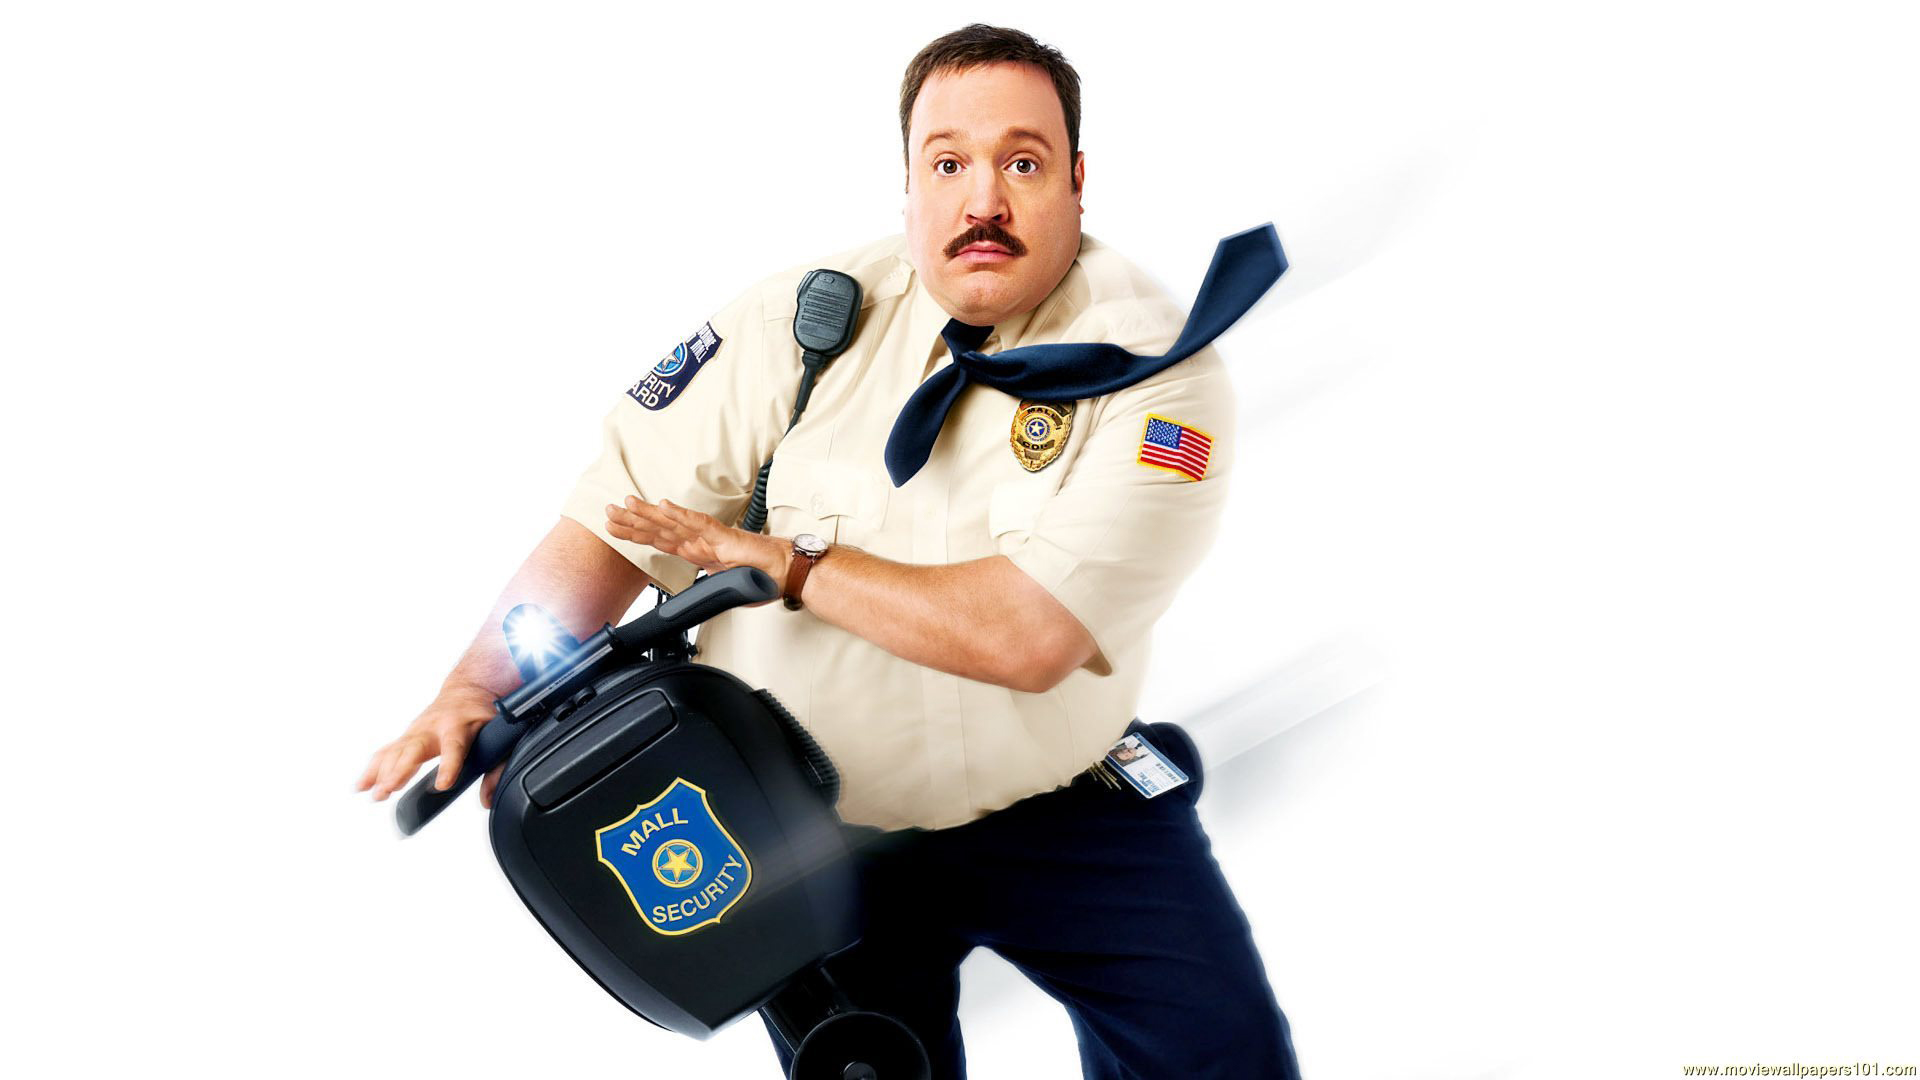 Images of Paul Blart: Mall Cop 2 | 1920x1080